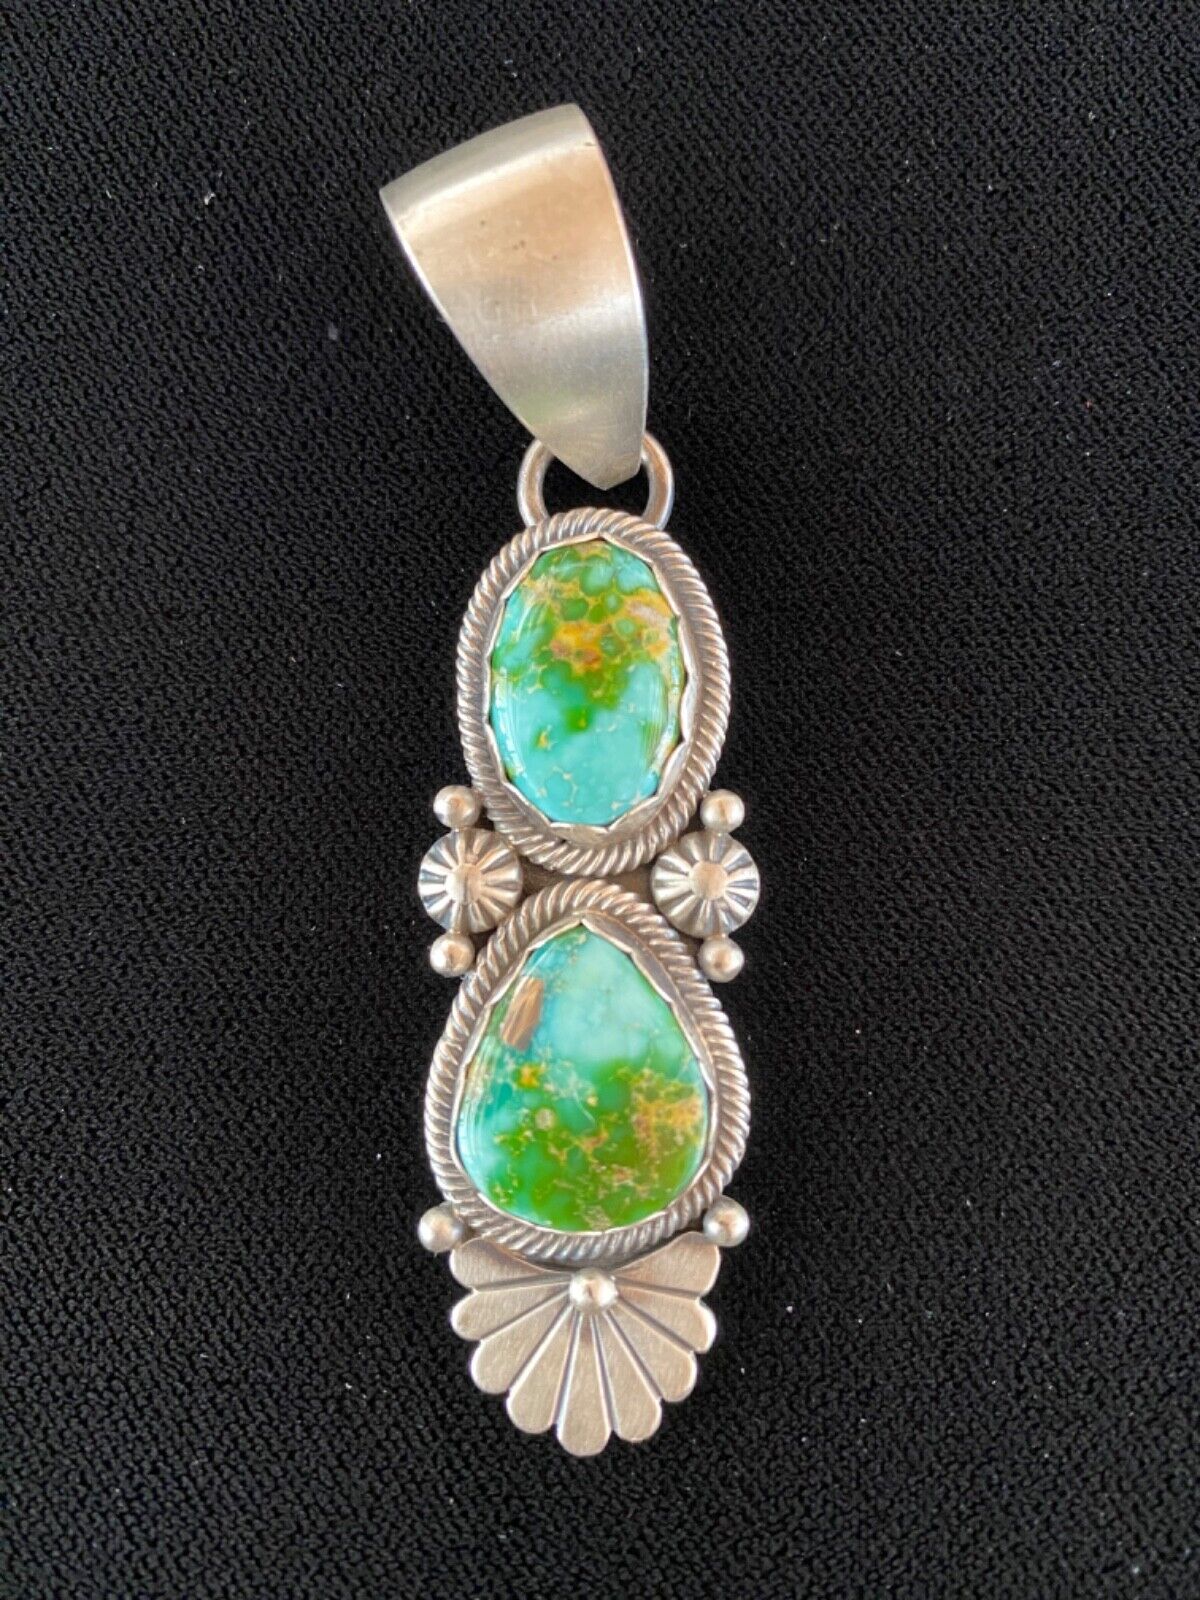 Navajo Native American Sterling Silver Sonoran Gold Turquoise Pendant-Signed MB